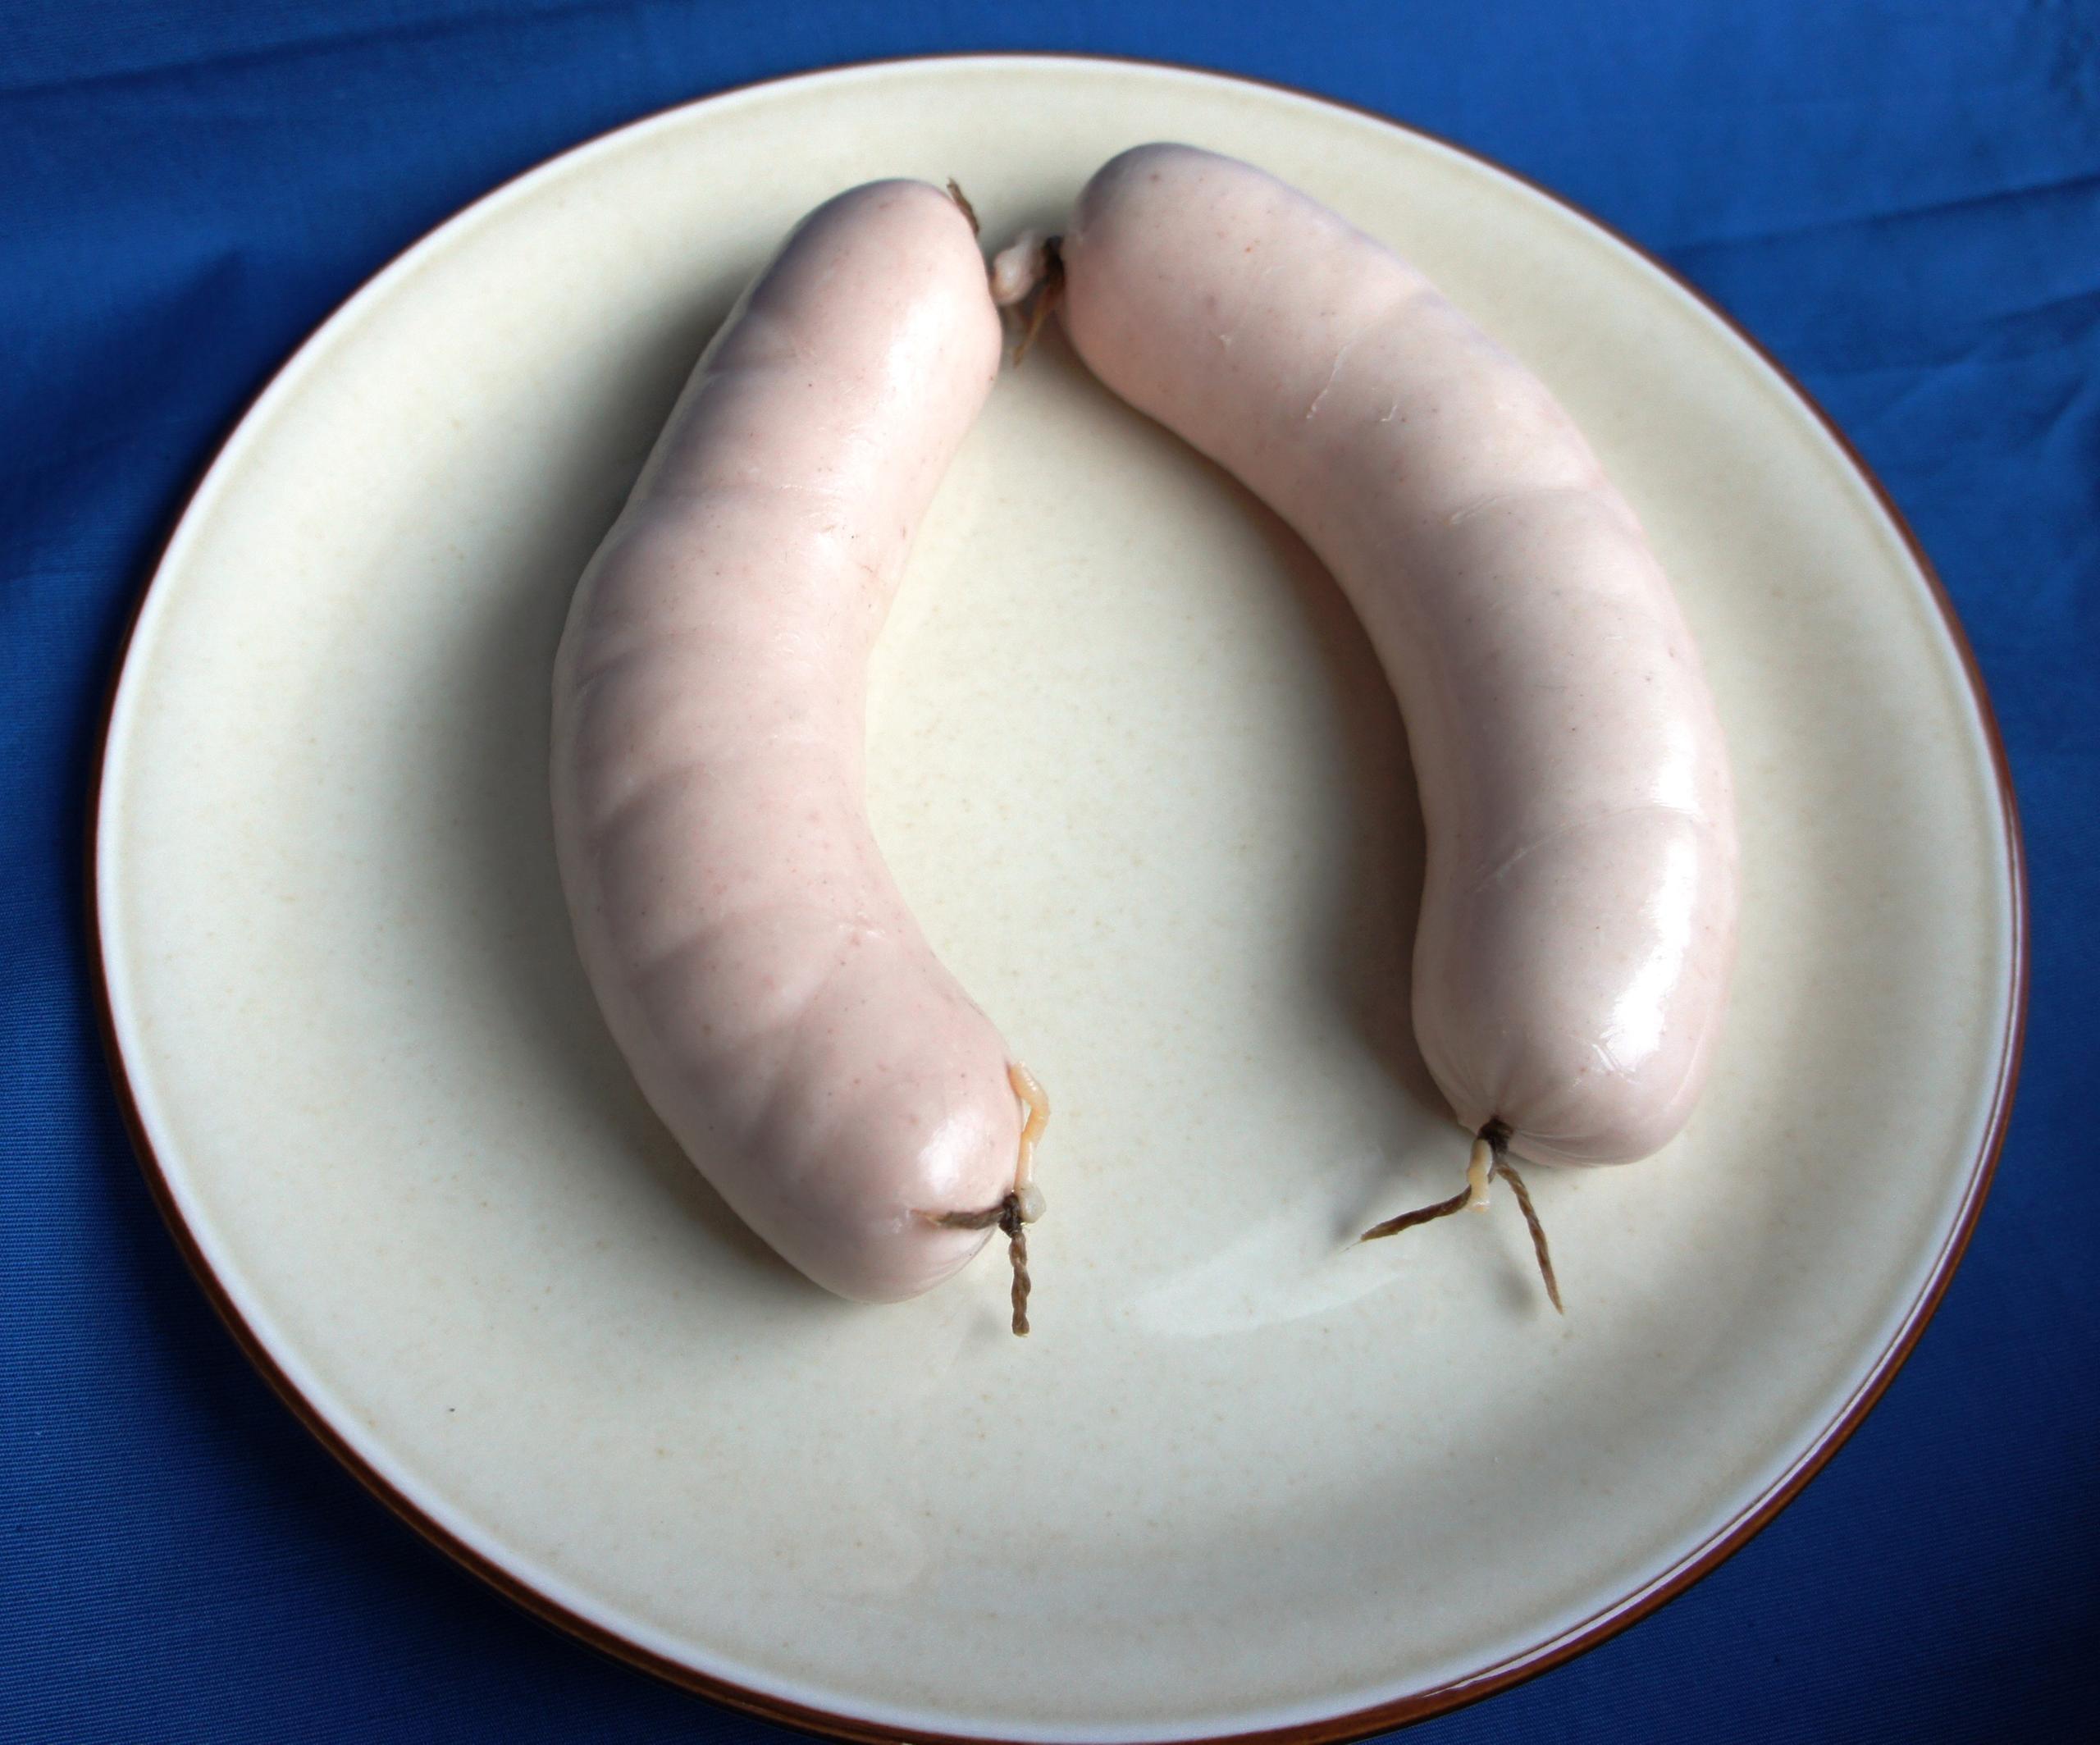 A pair of uncooked Appenzeller Siedwürst sausages